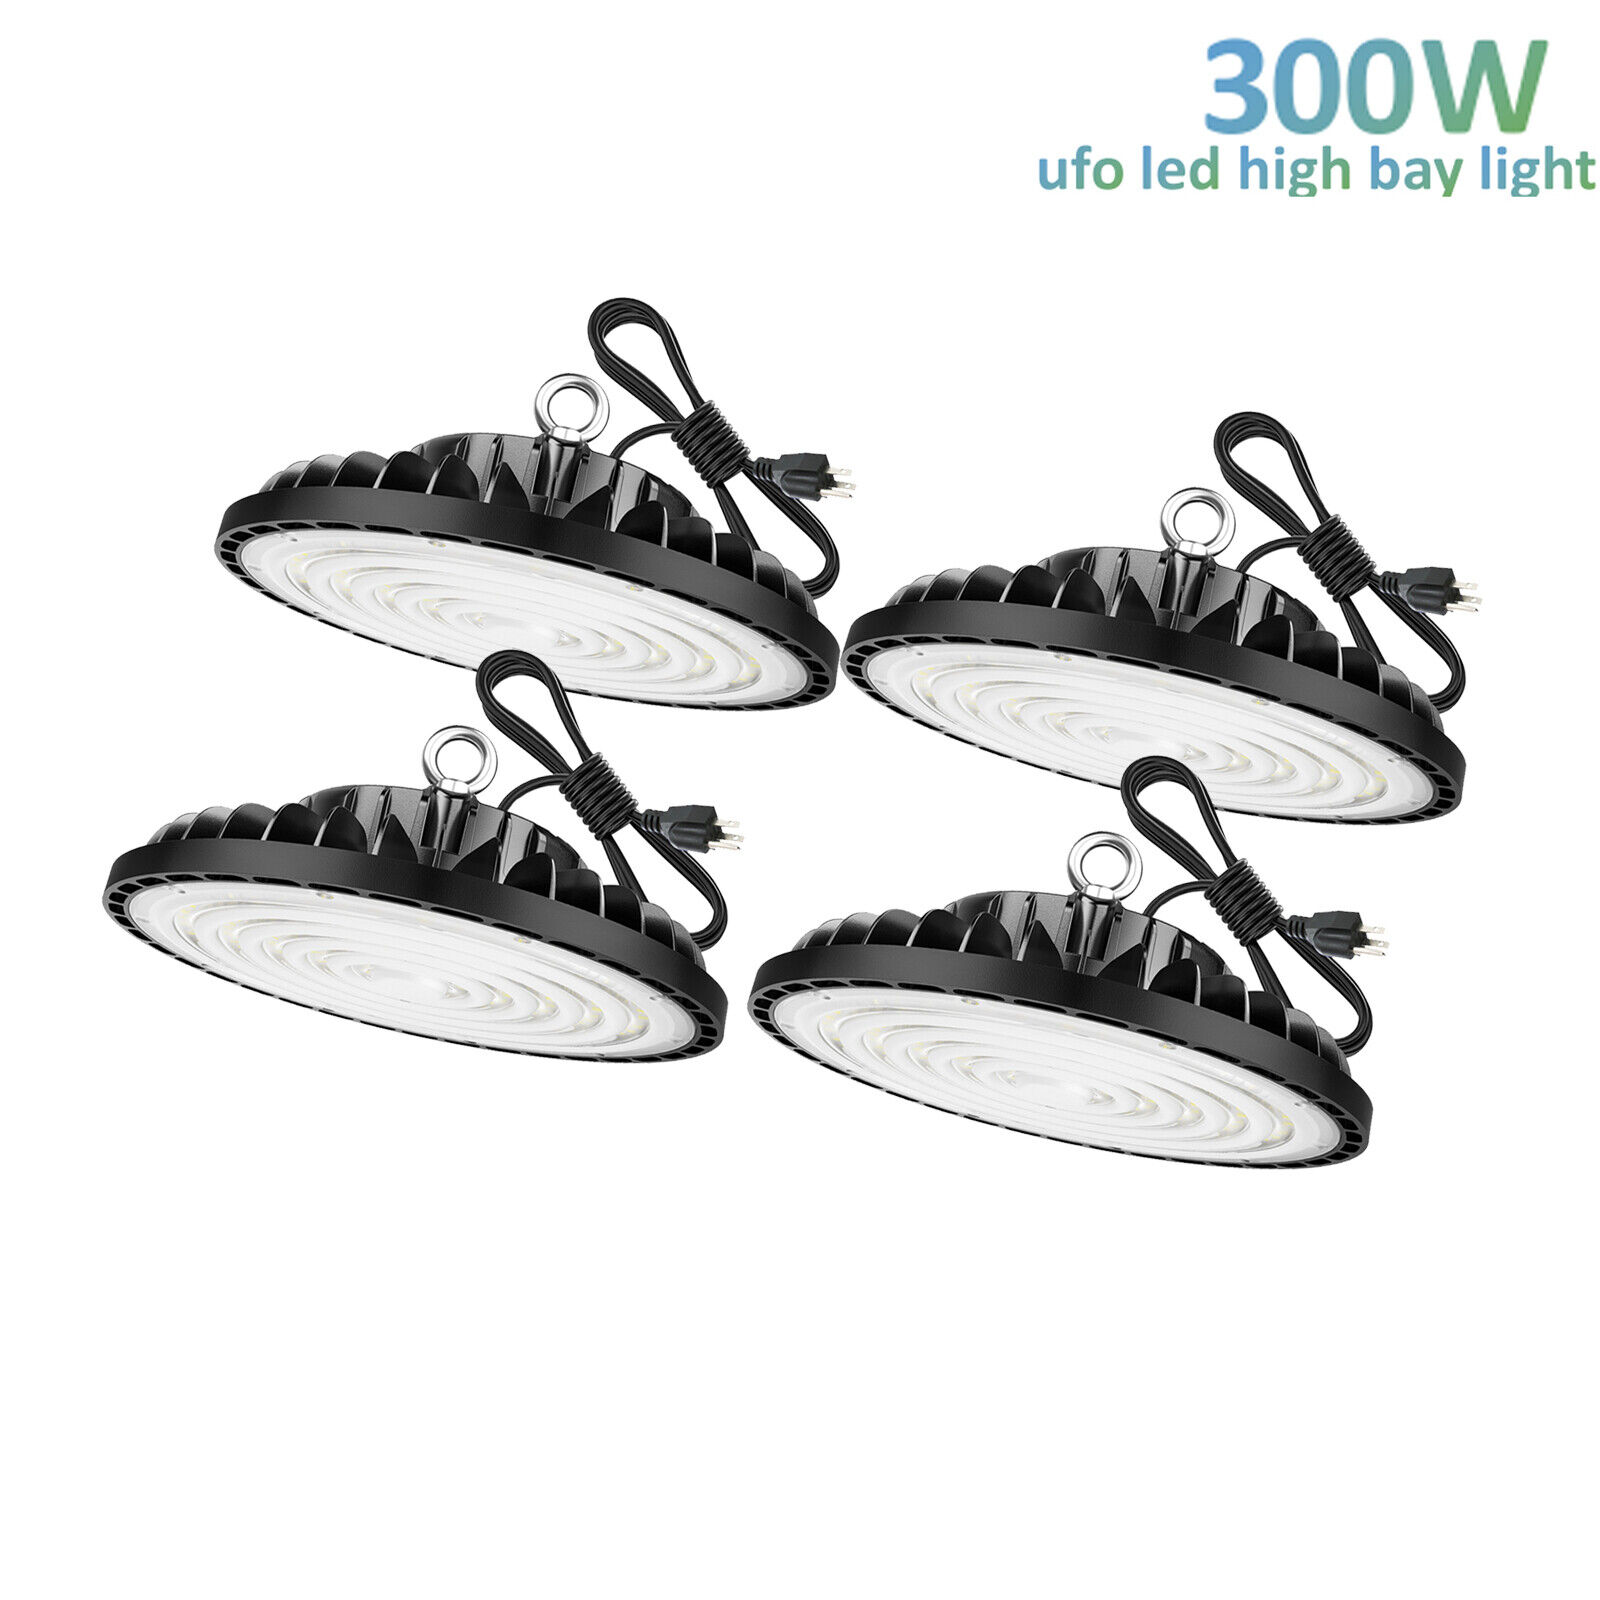 4x 300W UFO Led High Bay Light 300 Watts Commercial Factory Warehouse Shop Light